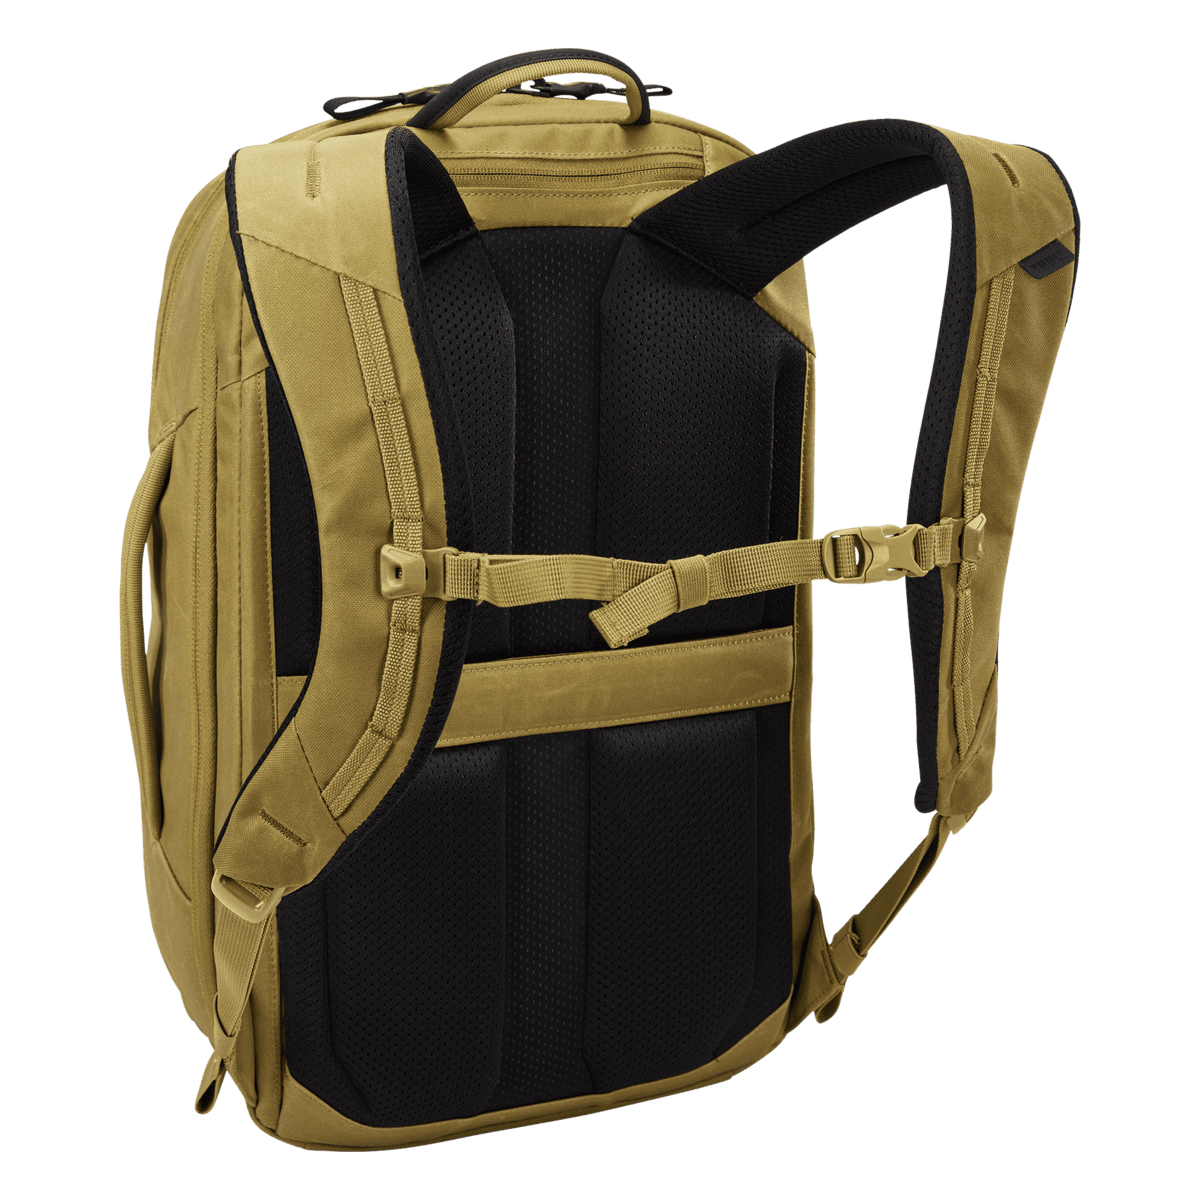 Aion 28L Travel Backpack